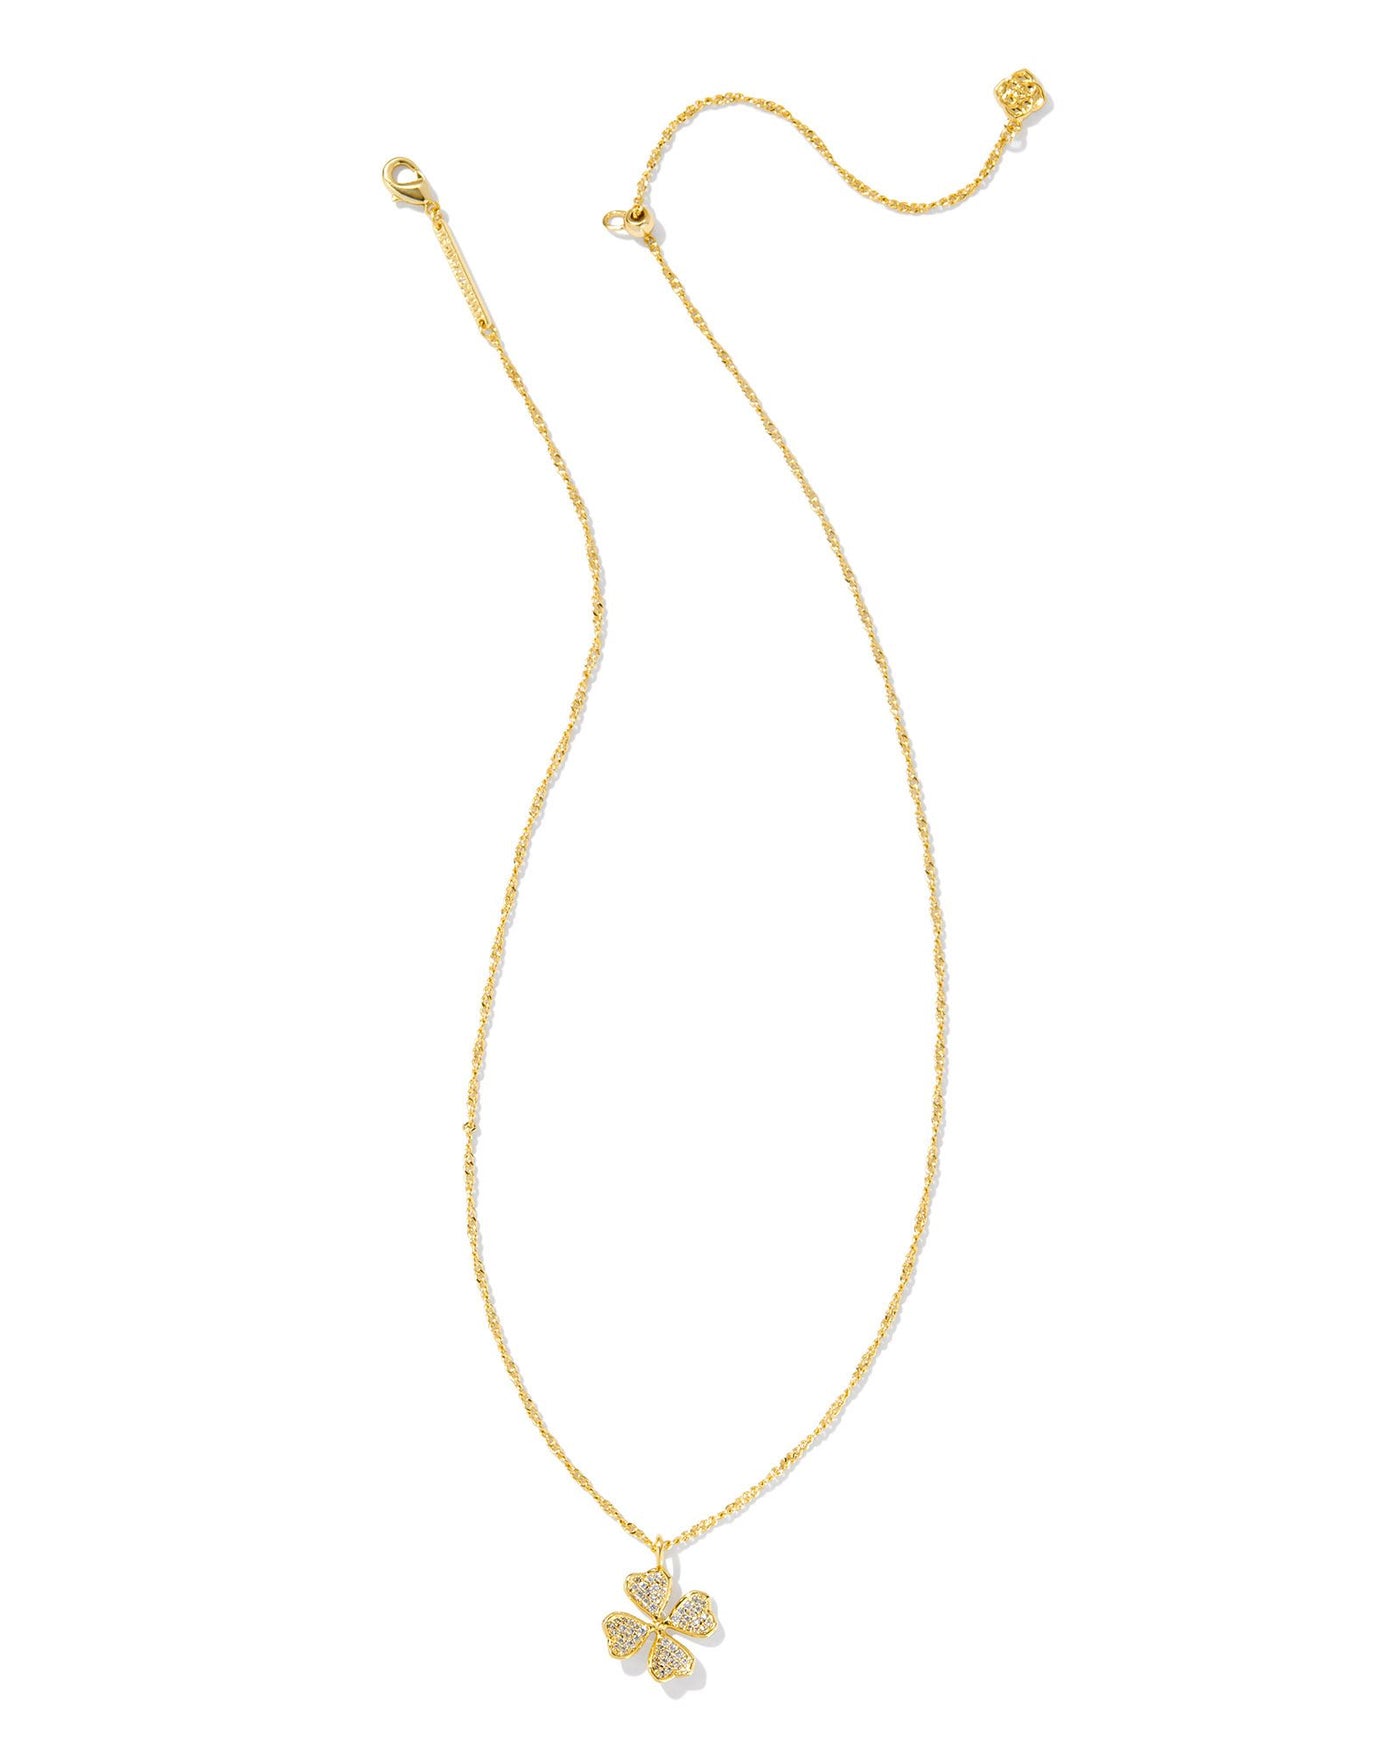 Kendra Scott Clover Crystal Shor Pendant Necklace-Necklaces-Kendra Scott-Market Street Nest, Fashionable Clothing, Shoes and Home Décor Located in Mabank, TX